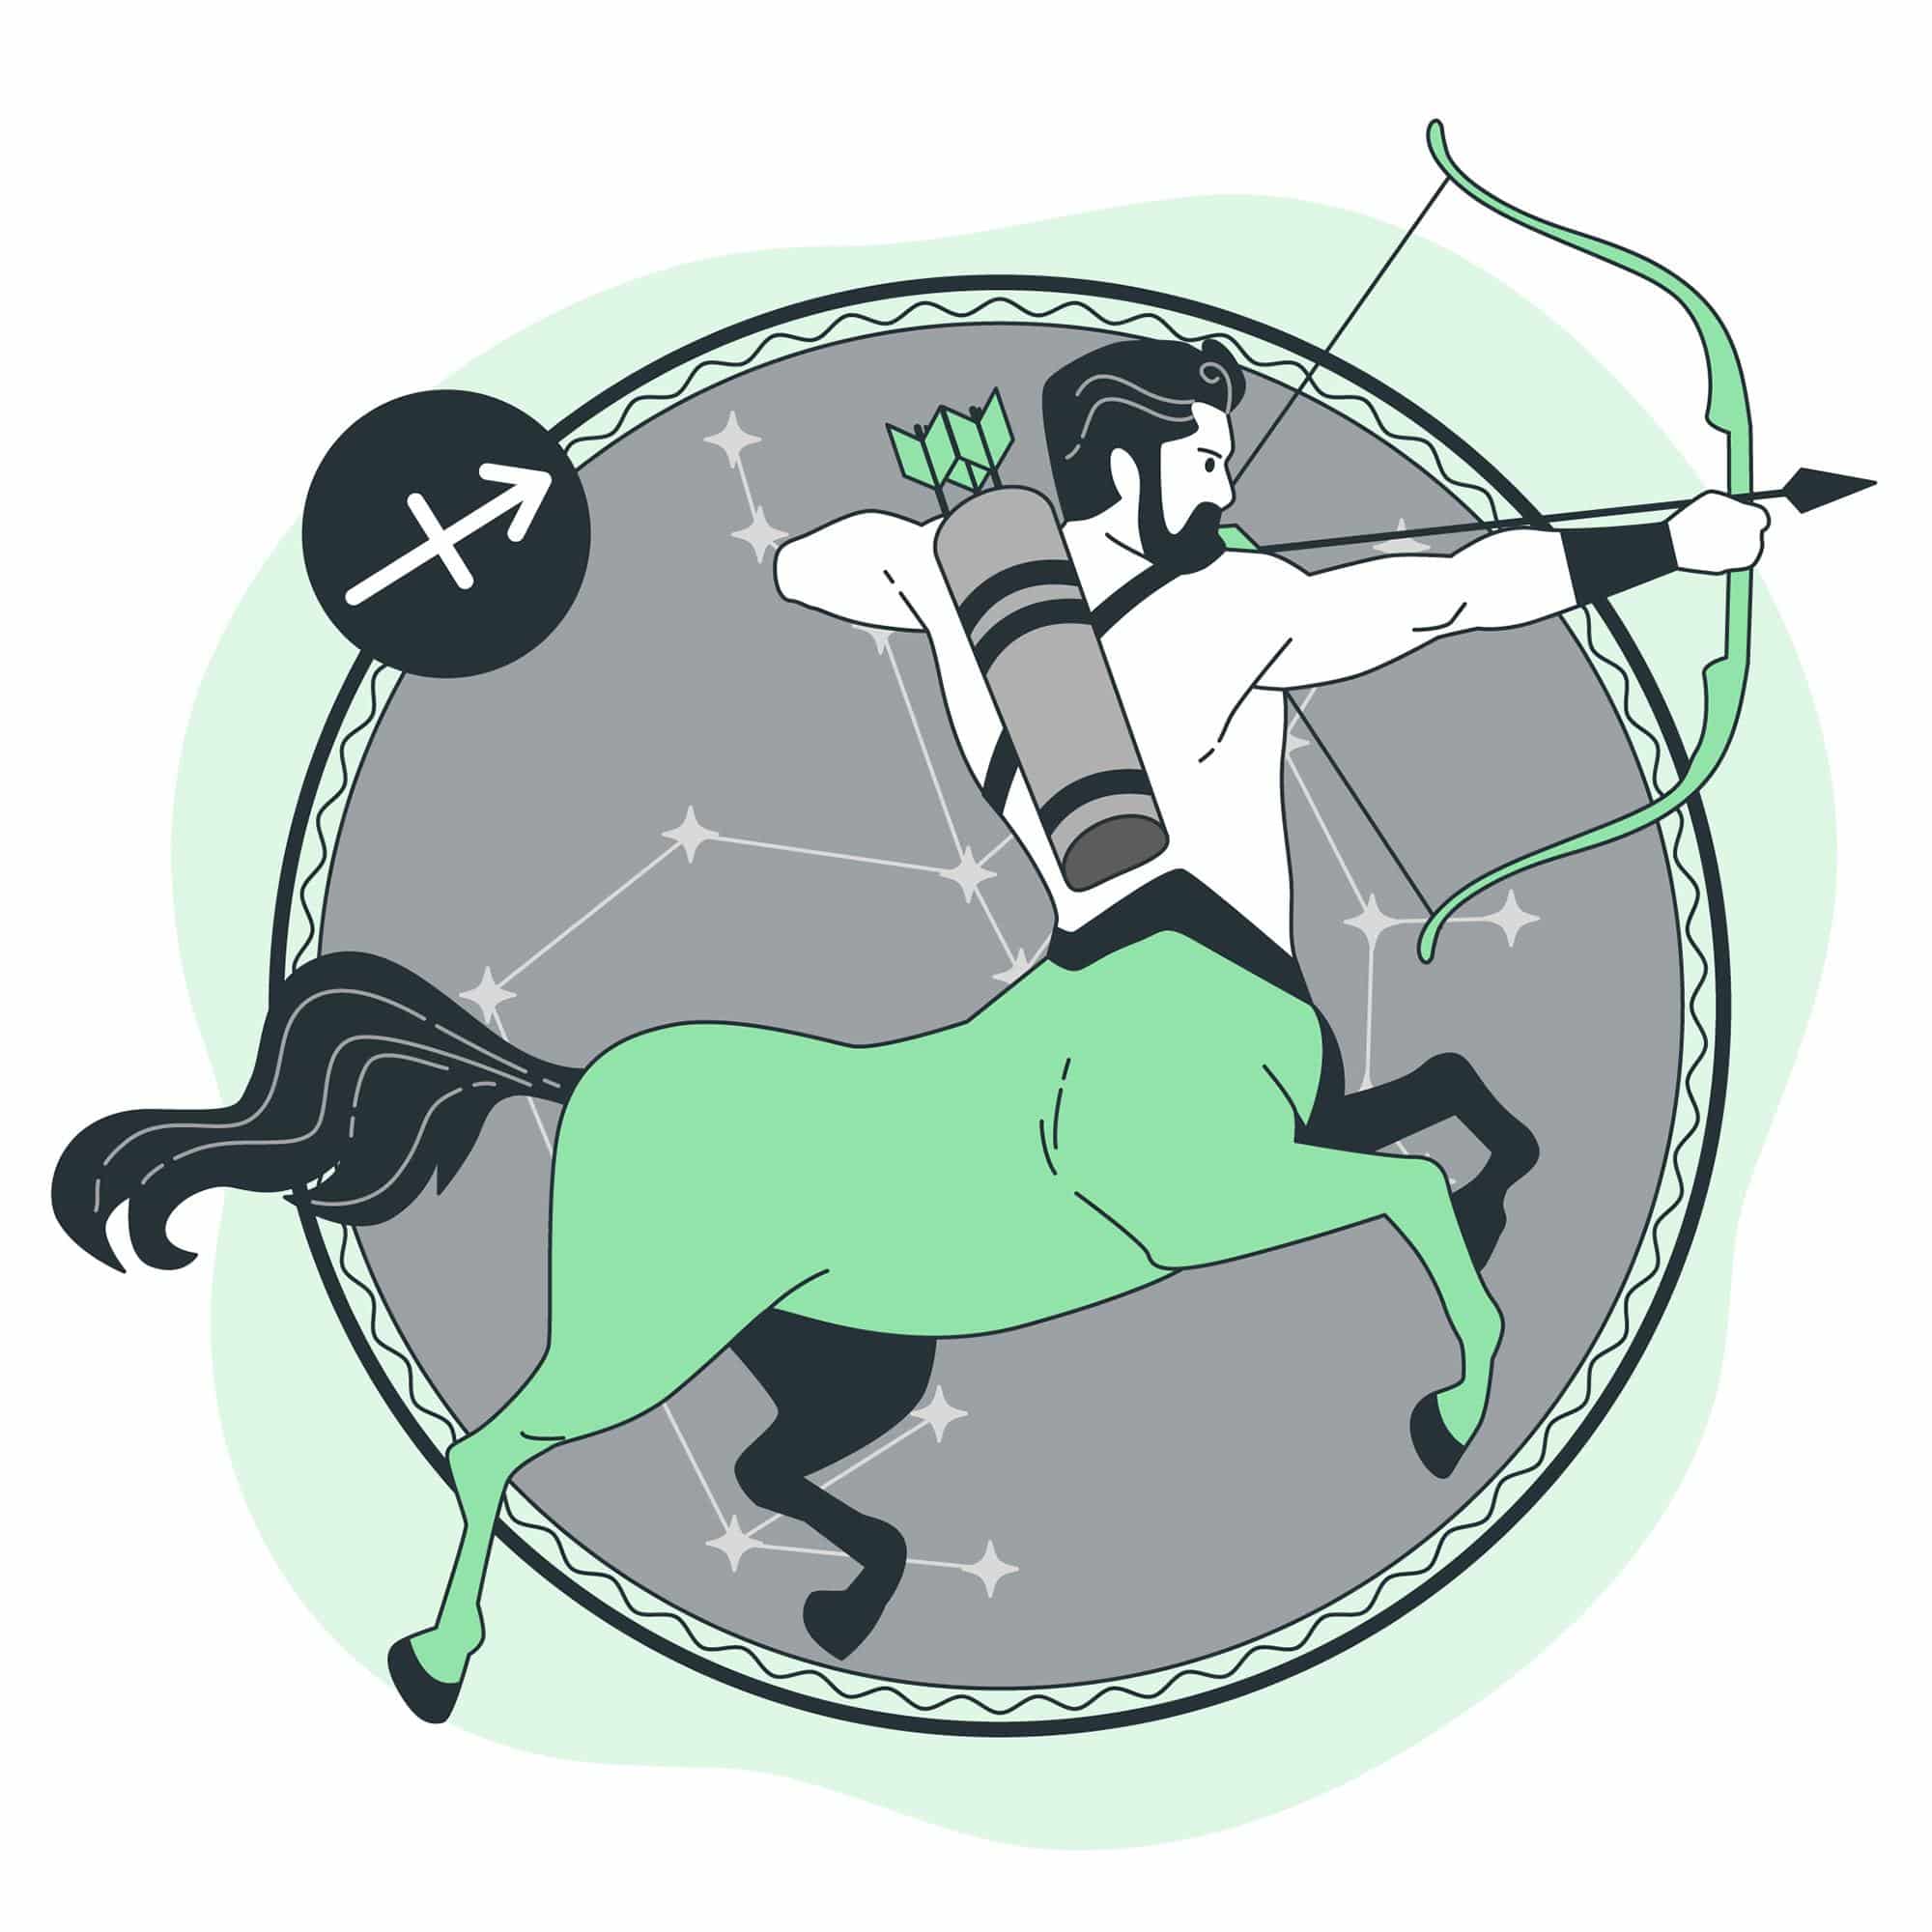 Moon in Sagittarius: how does it influence your sign?